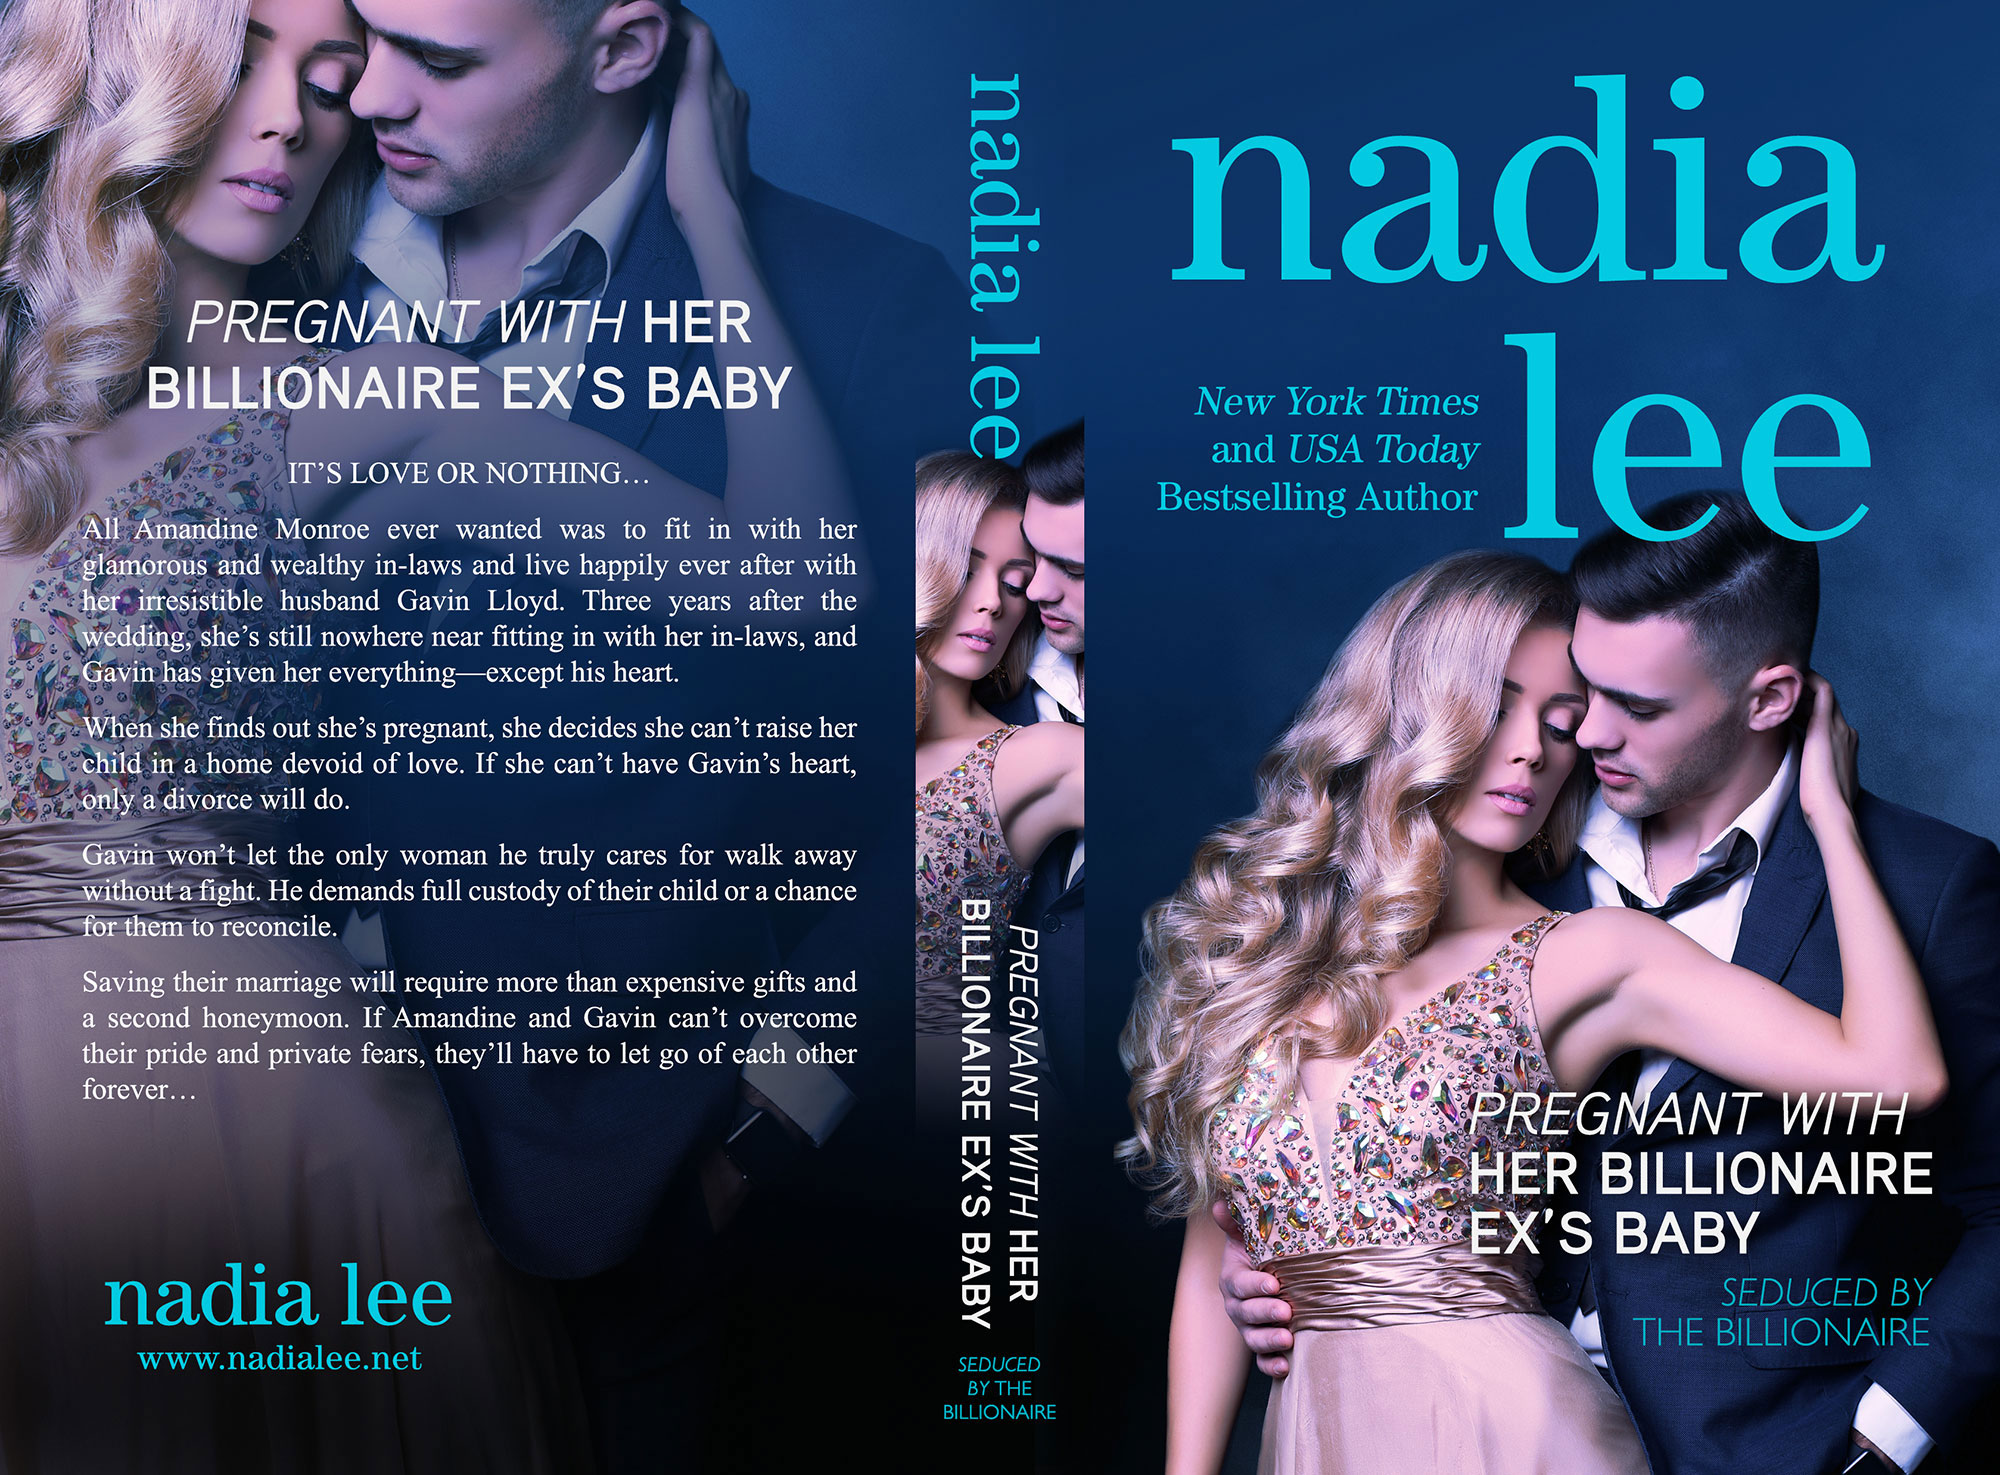 Pregnant with Her Billionaire Ex's Baby by Nadia Lee (Print Coverflat)